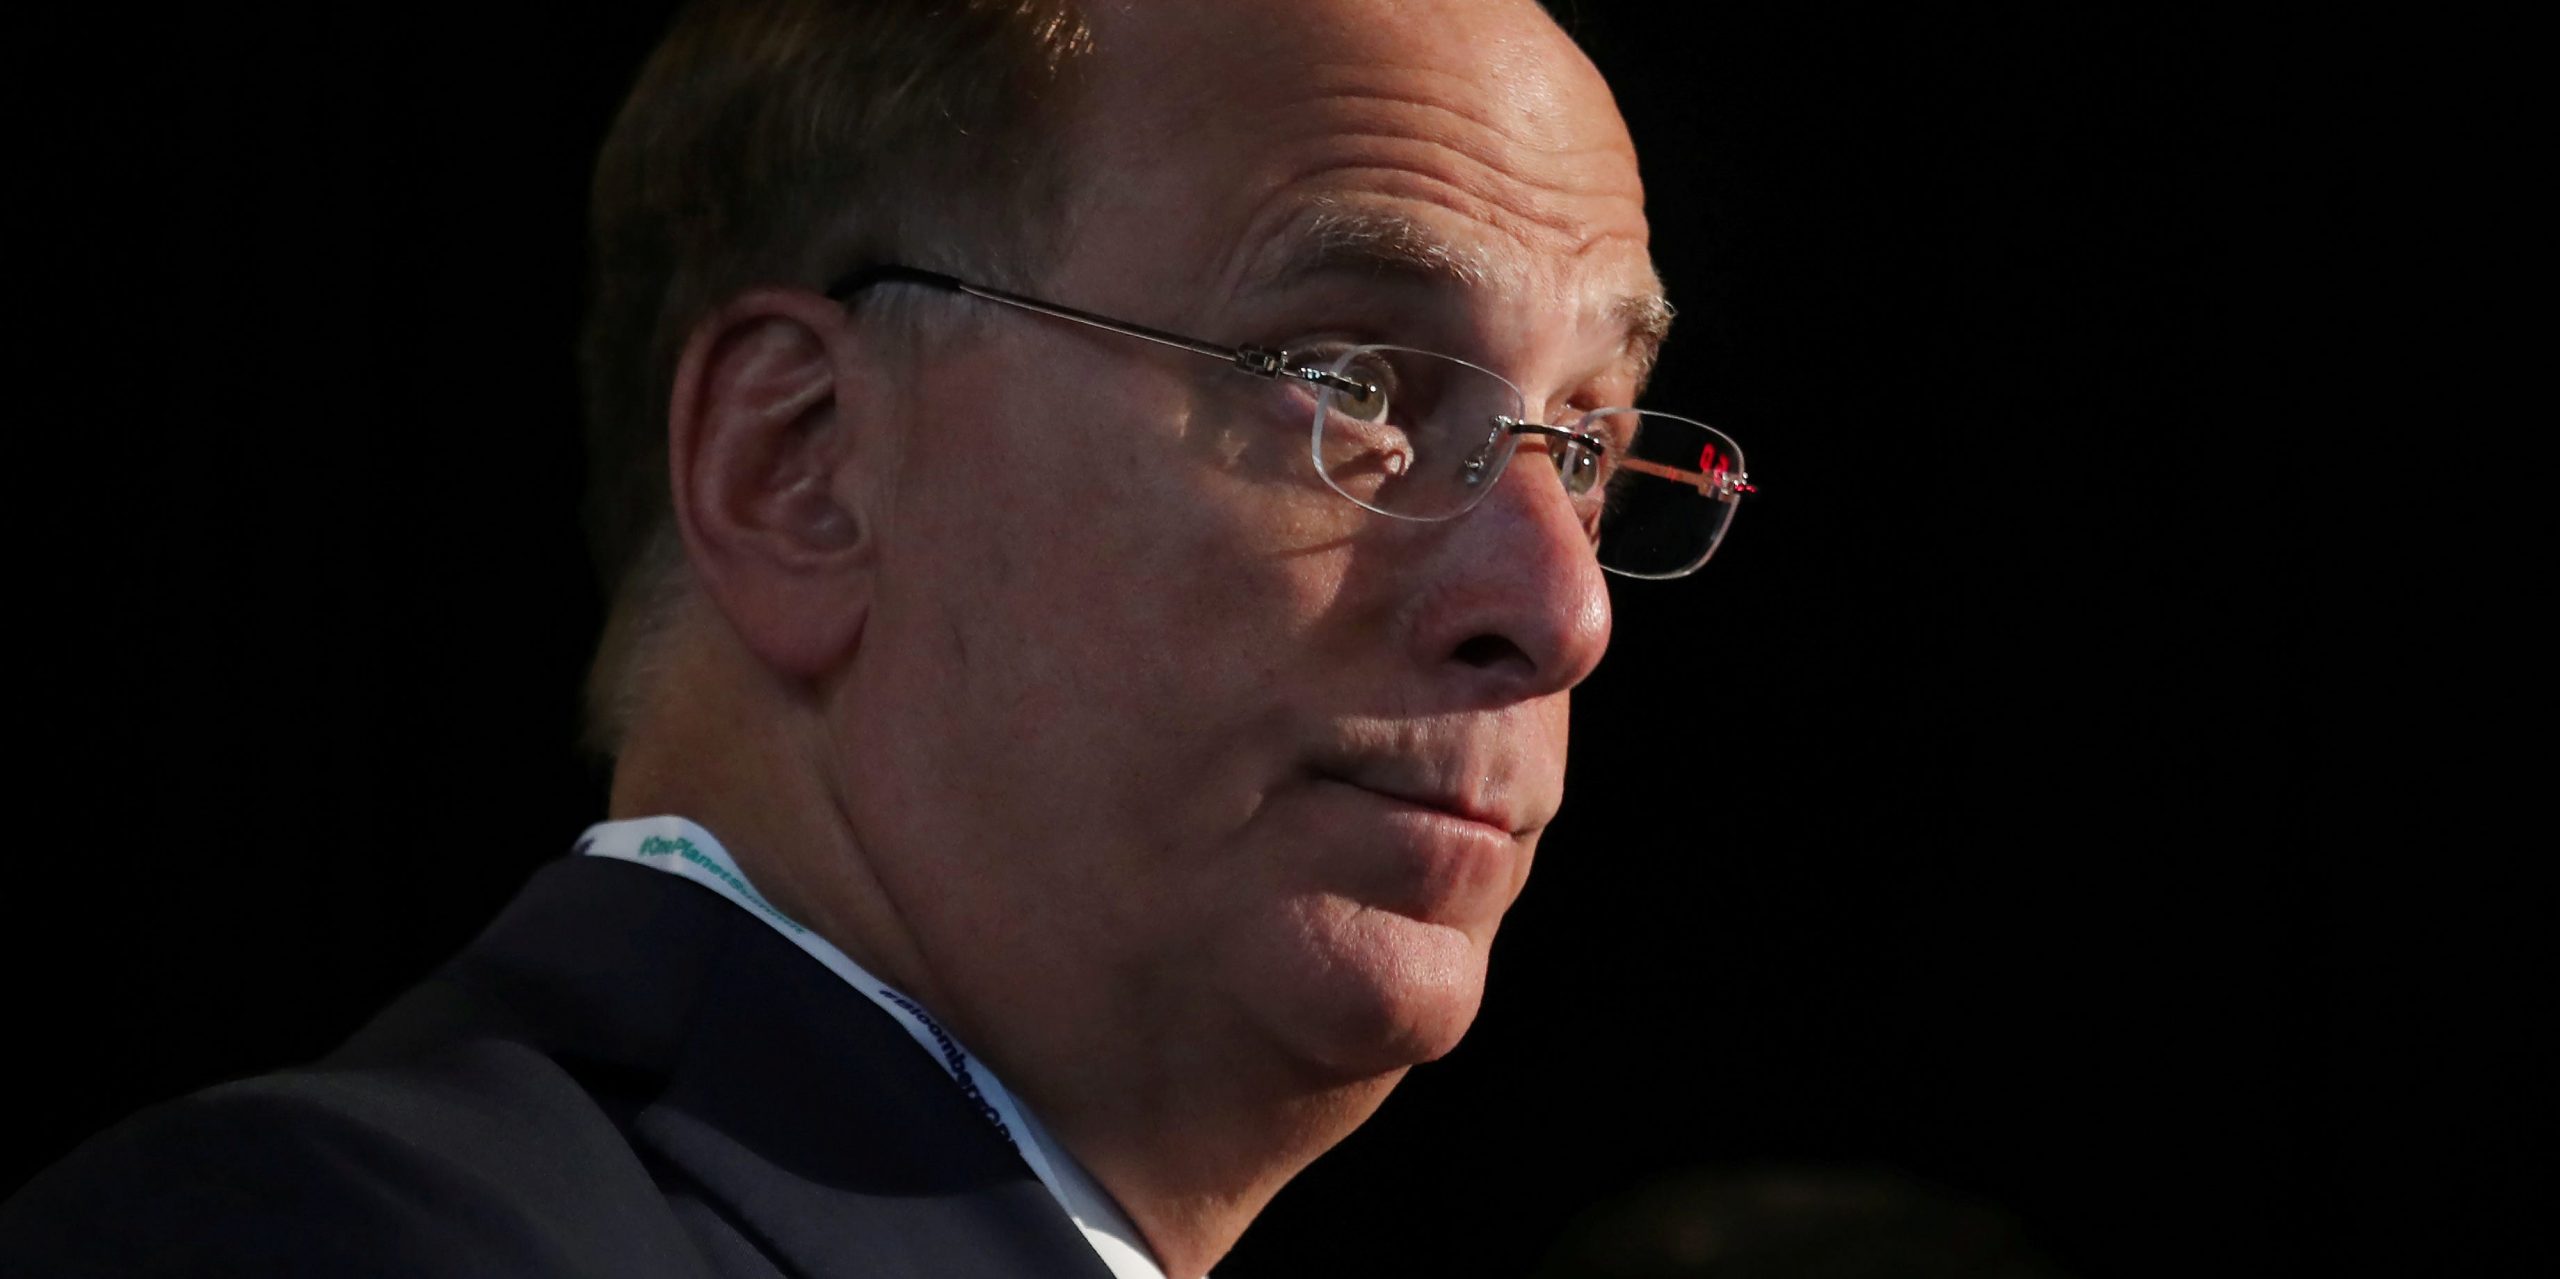 FILE PHOTO: Larry Fink, Chief Executive Officer of BlackRock, stands at the Bloomberg Global Business forum in New York, U.S., September 26, 2018. REUTERS/Shannon Stapleton